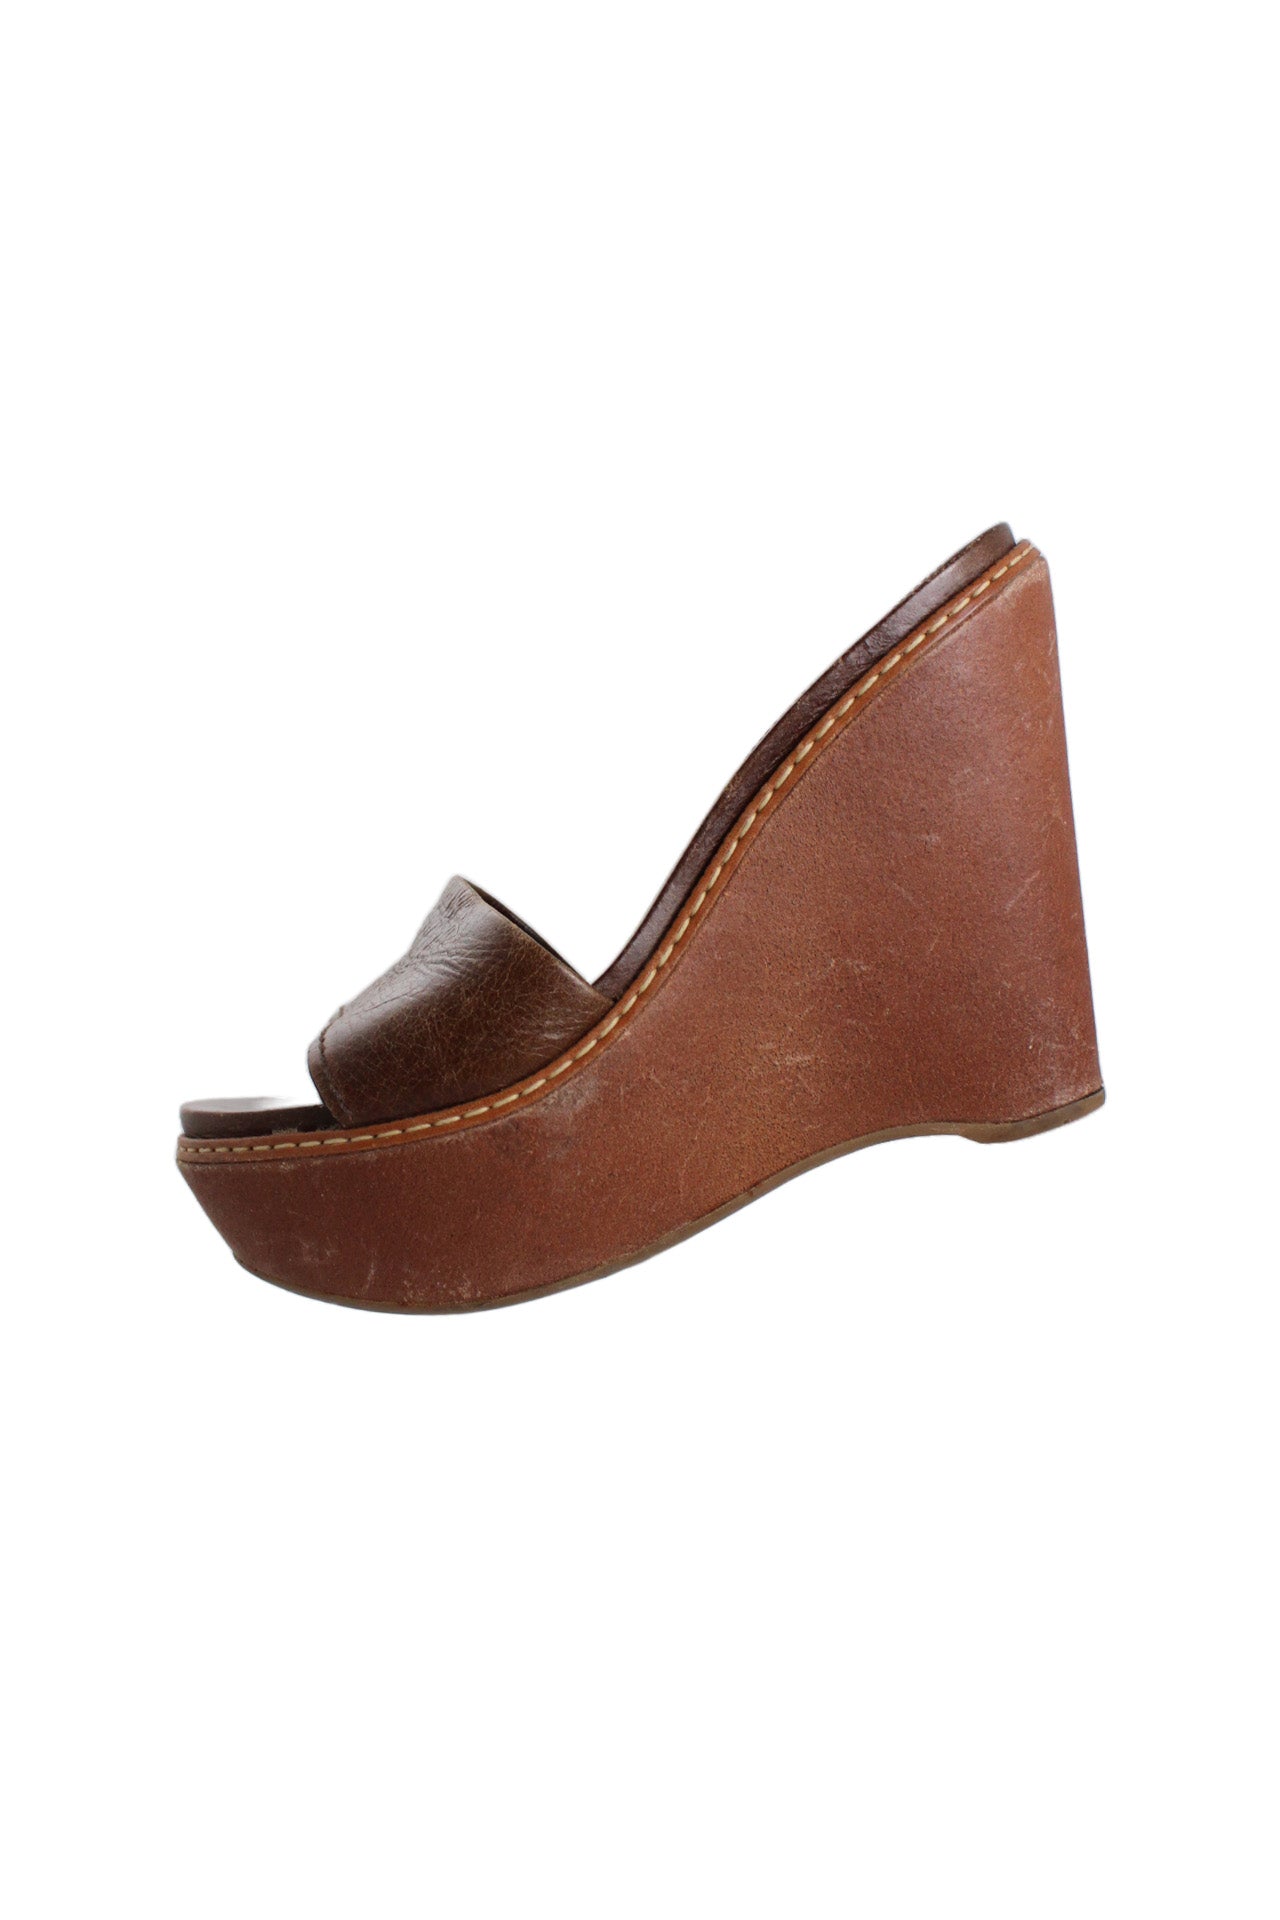 prada brown leather platform wedges. features single strap in dark brown leather, branded insole, lighter brown leather wedge, and visible stitching. 